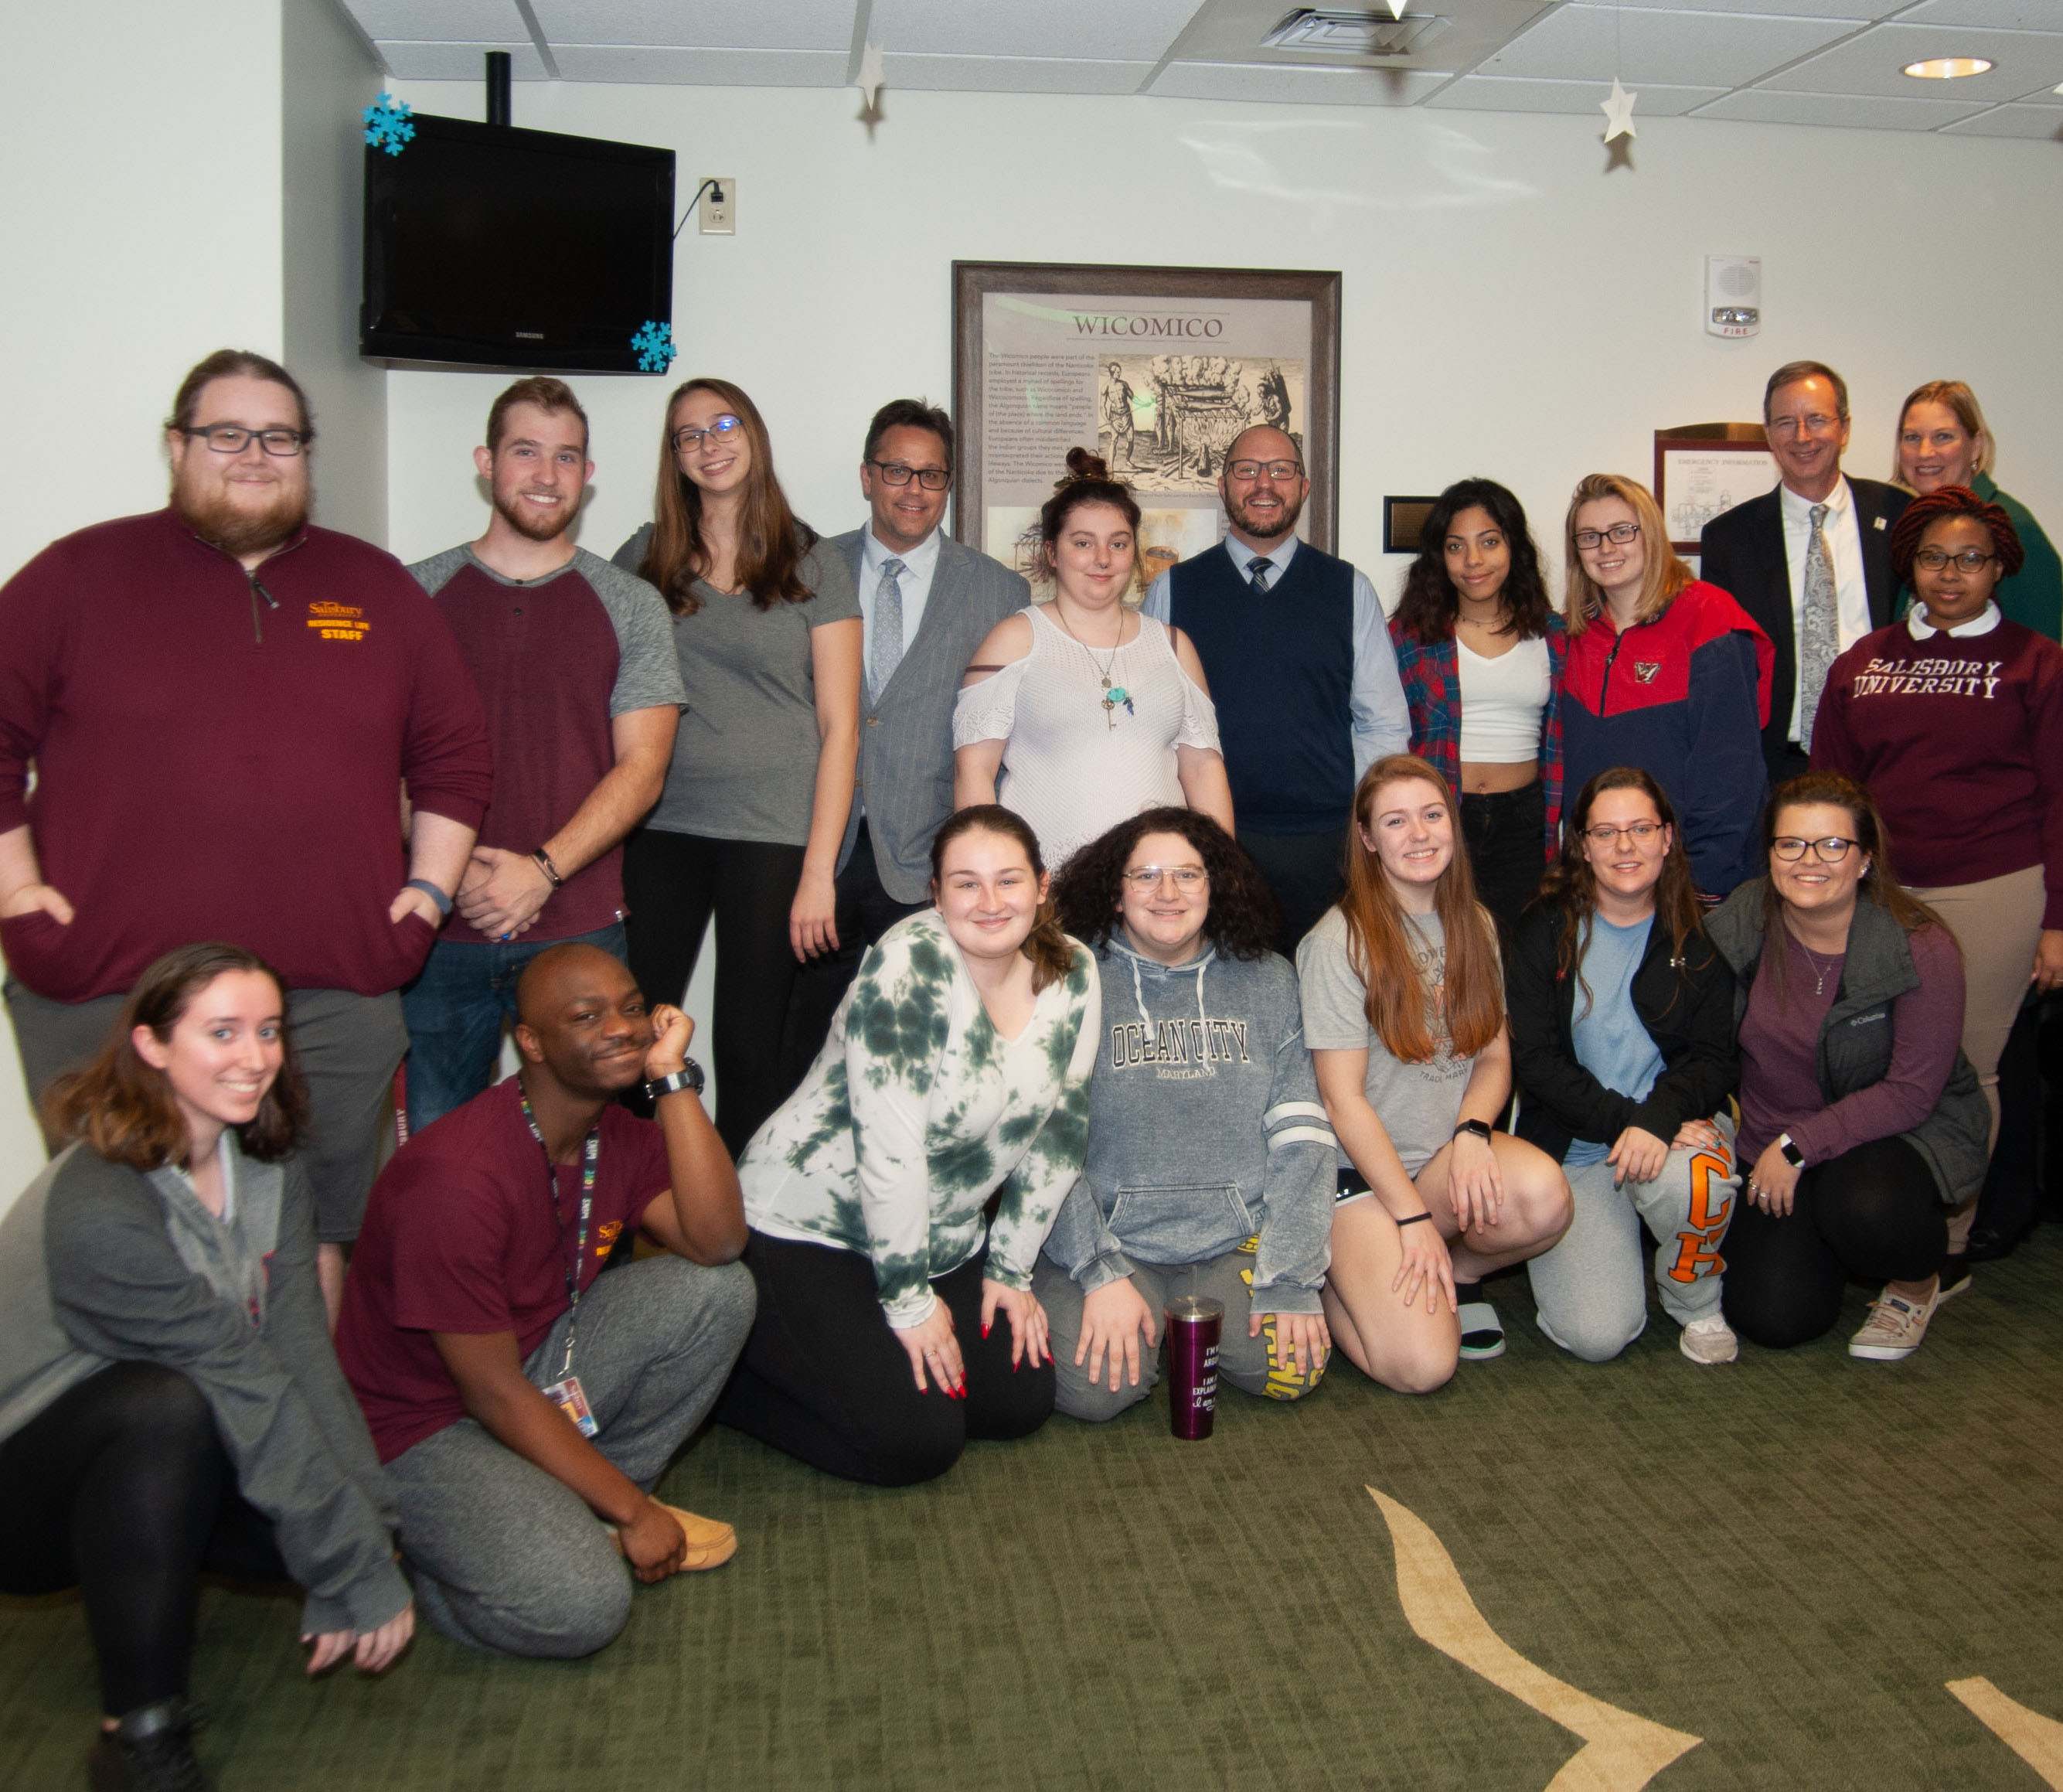 SU President Charles Wight with students